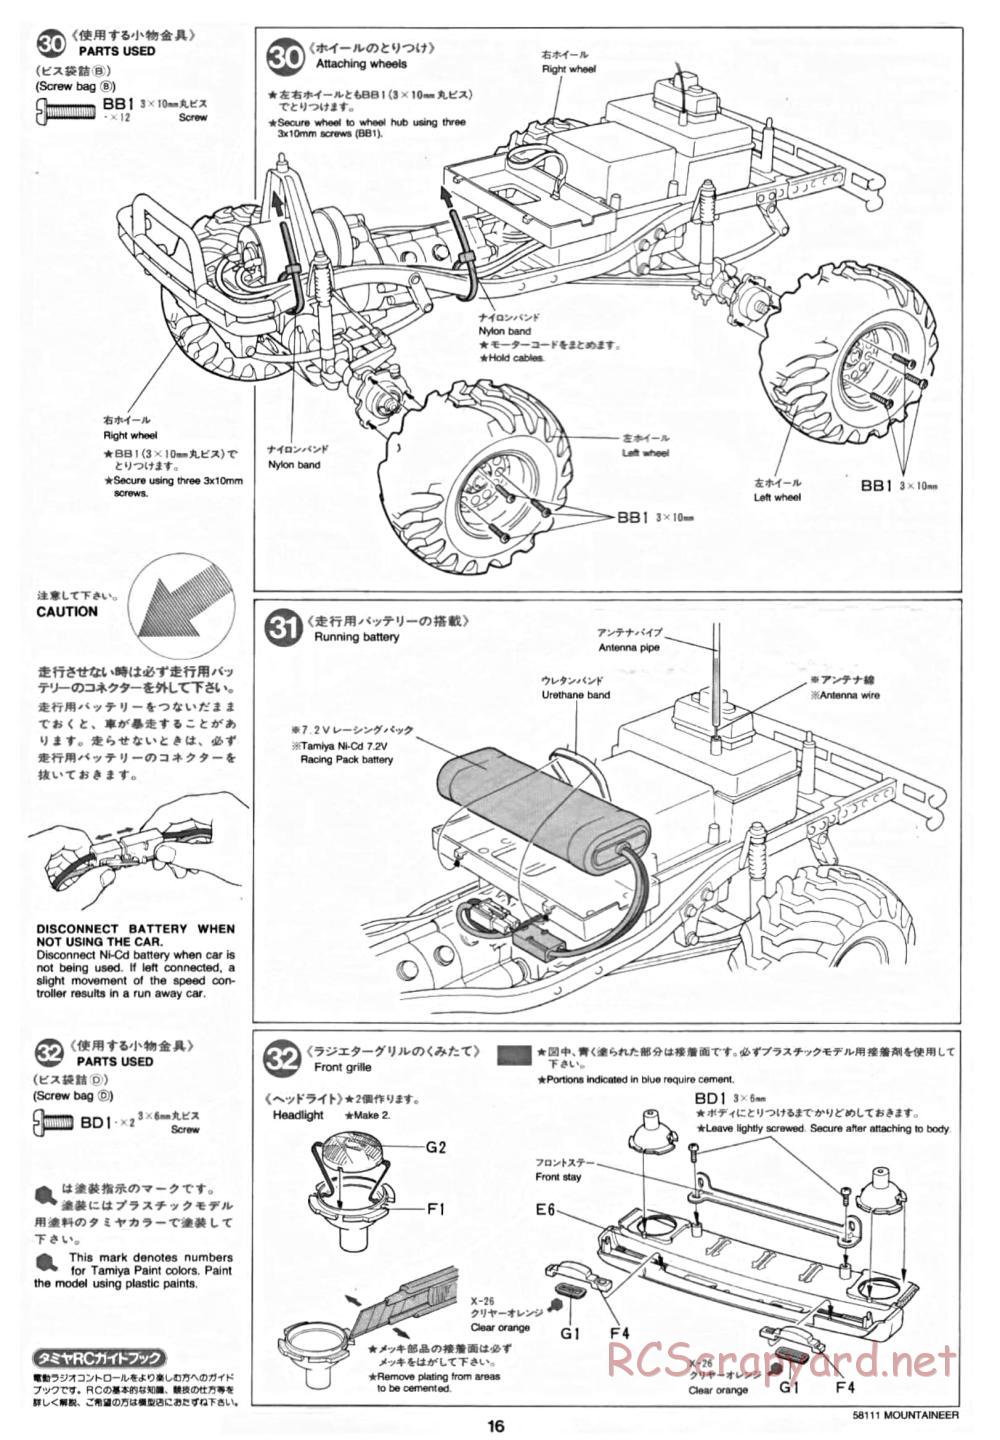 Tamiya - Toyota 4x4 Pick Up Mountaineer Chassis - Manual - Page 16